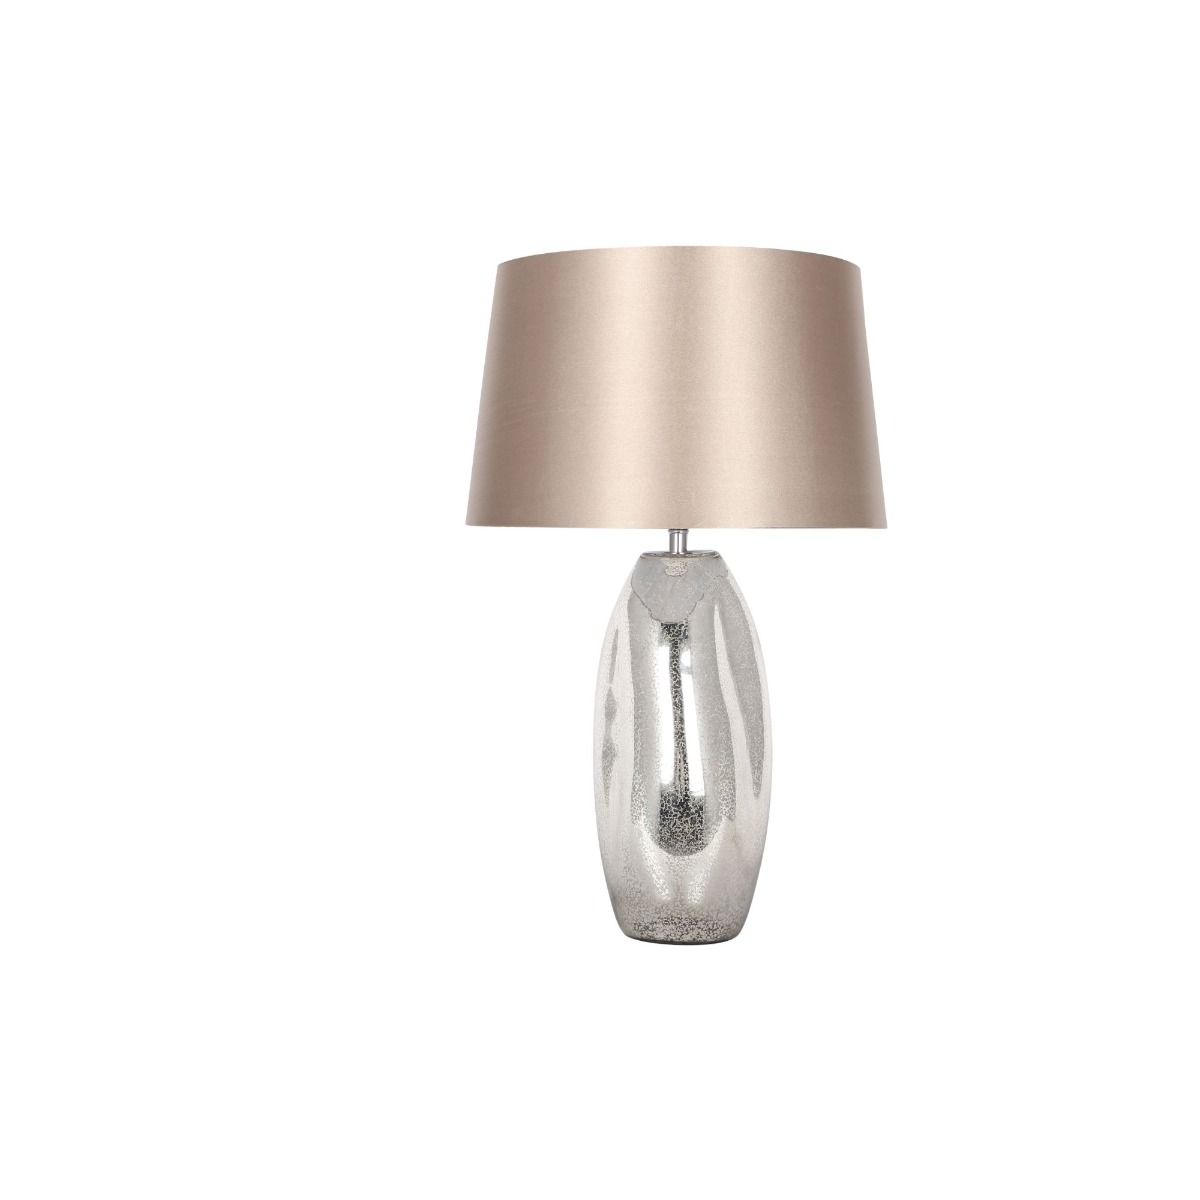 Josie Mercury Effect Glass Table Lamp with Taupe Shade